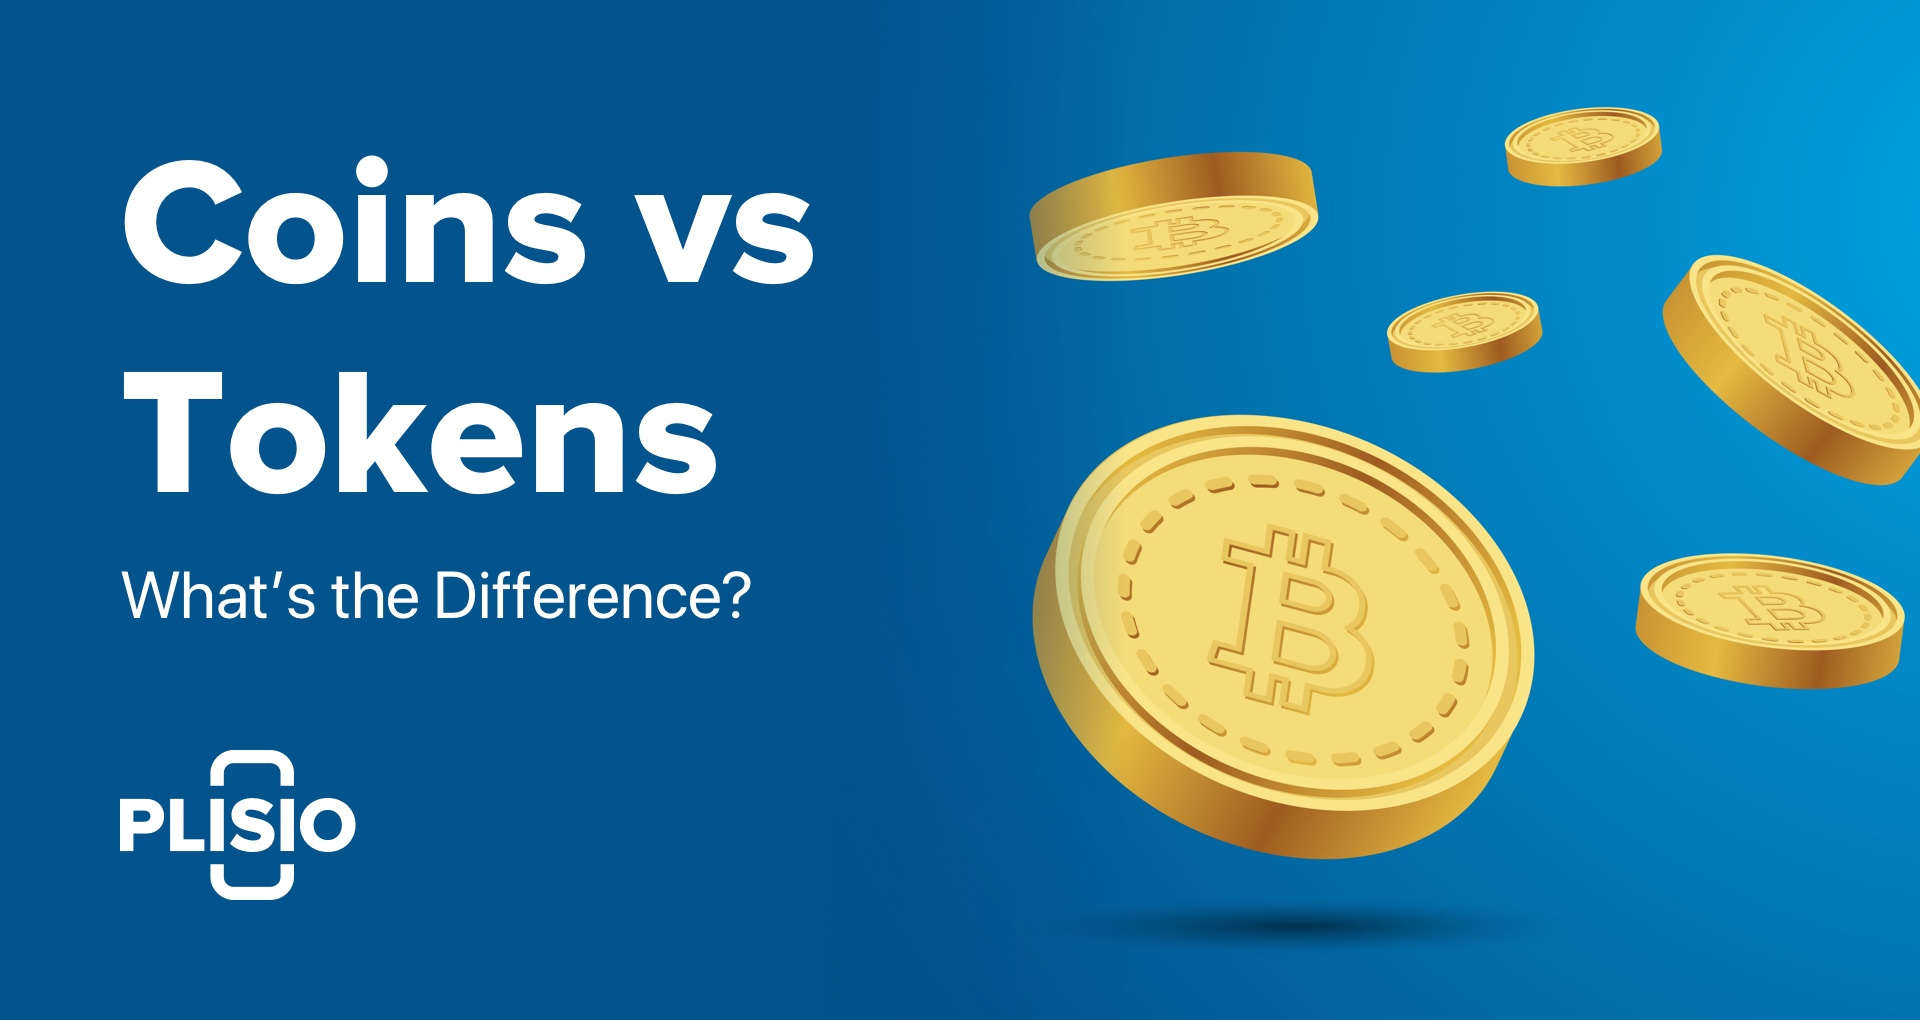 Altcoins, coins, and tokens: What’s the difference?